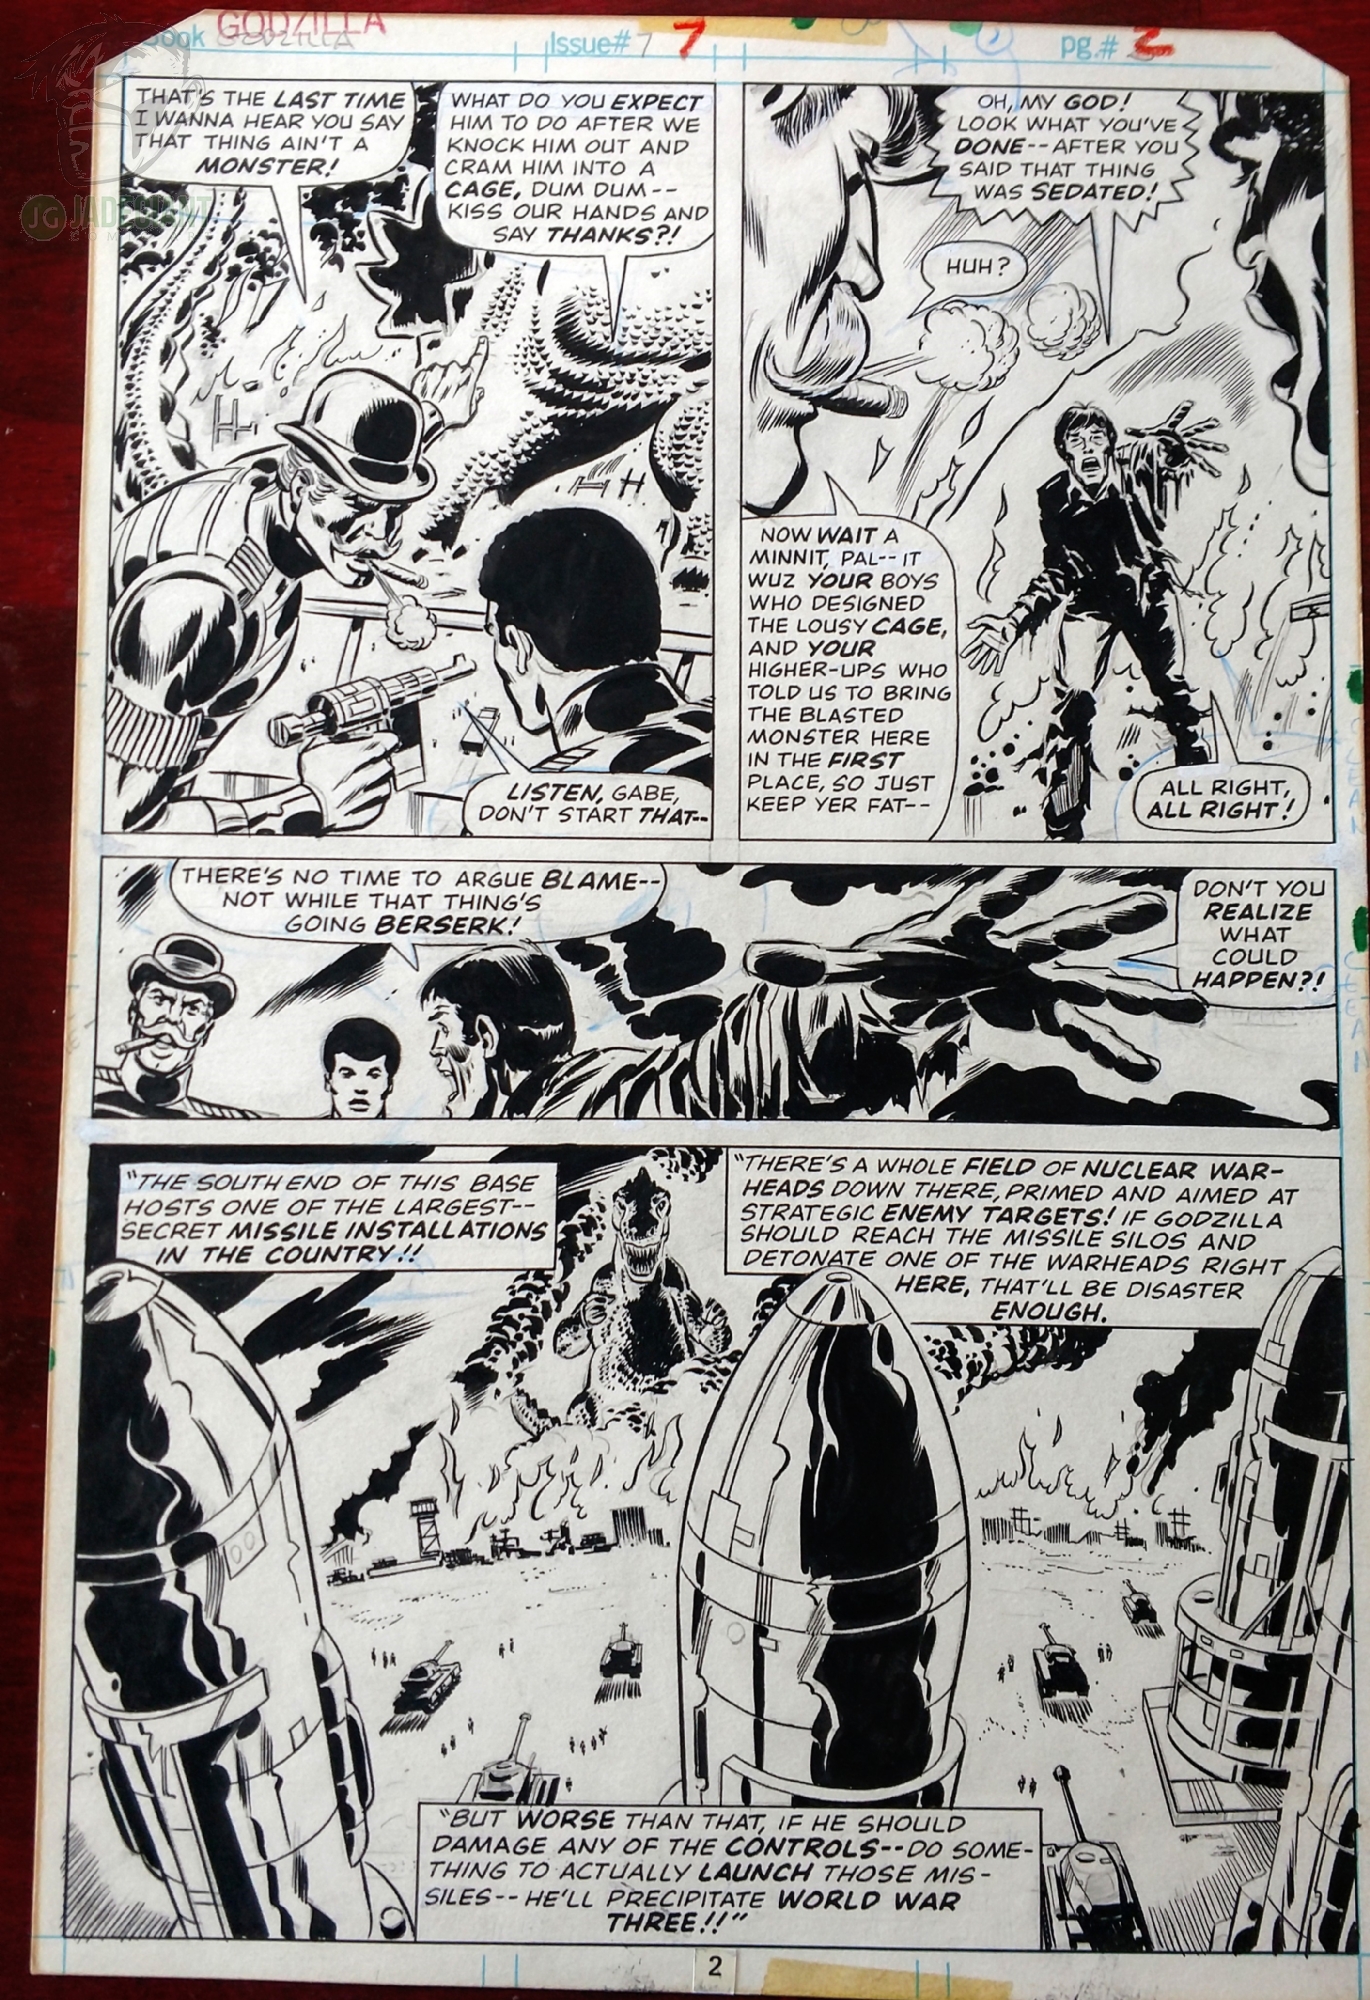 1978 Godzilla King of the Monsters Issue 7 Page 2 by Herb Trimpe Comic Art